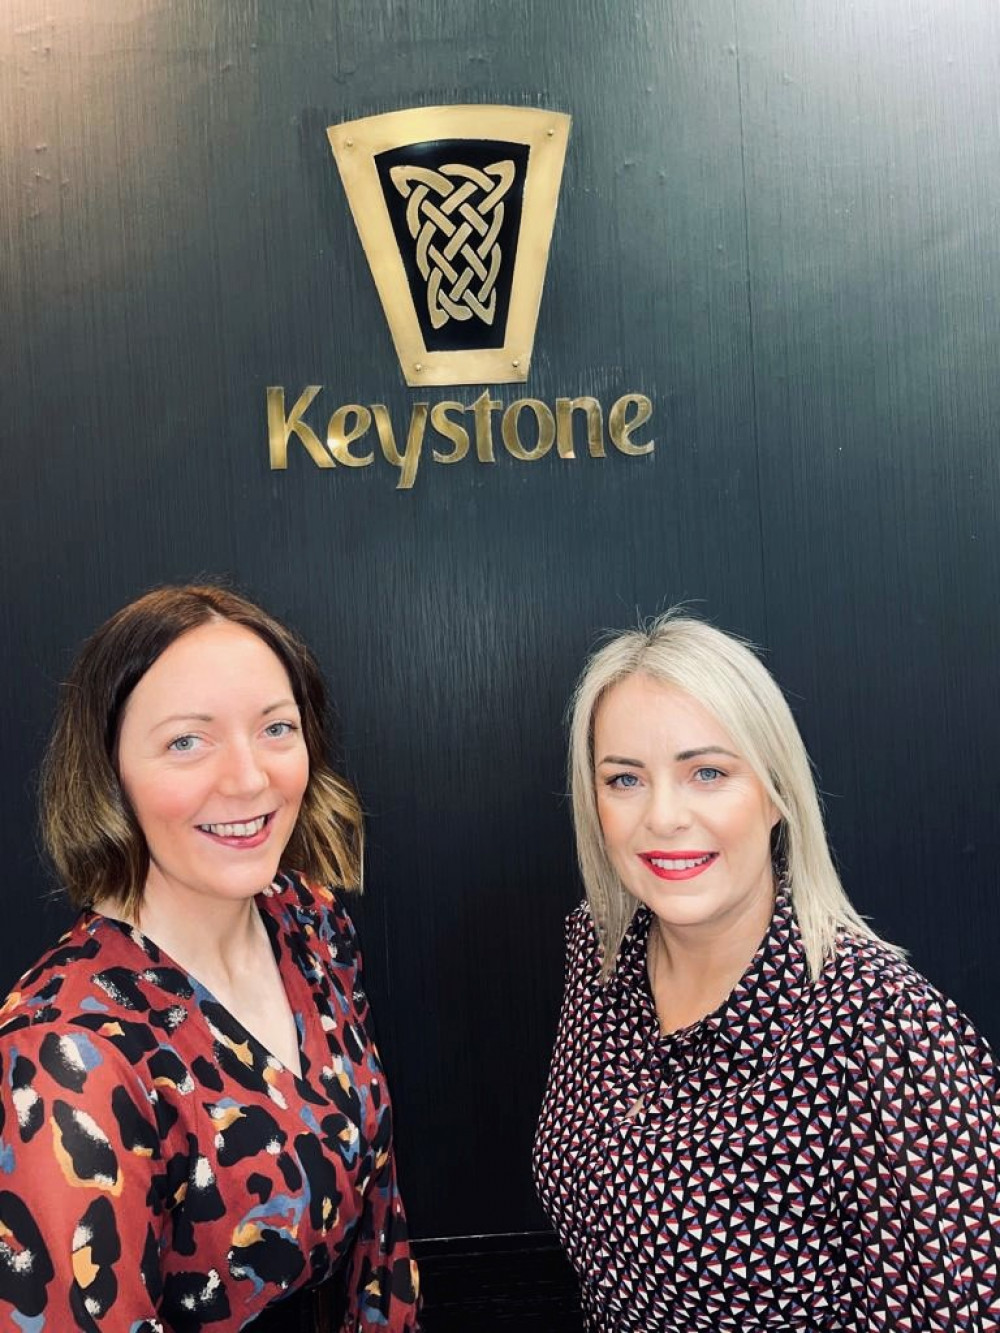 Claire and Niamh at the Radius Insurance formerly Keystone offices (Image - Radius)